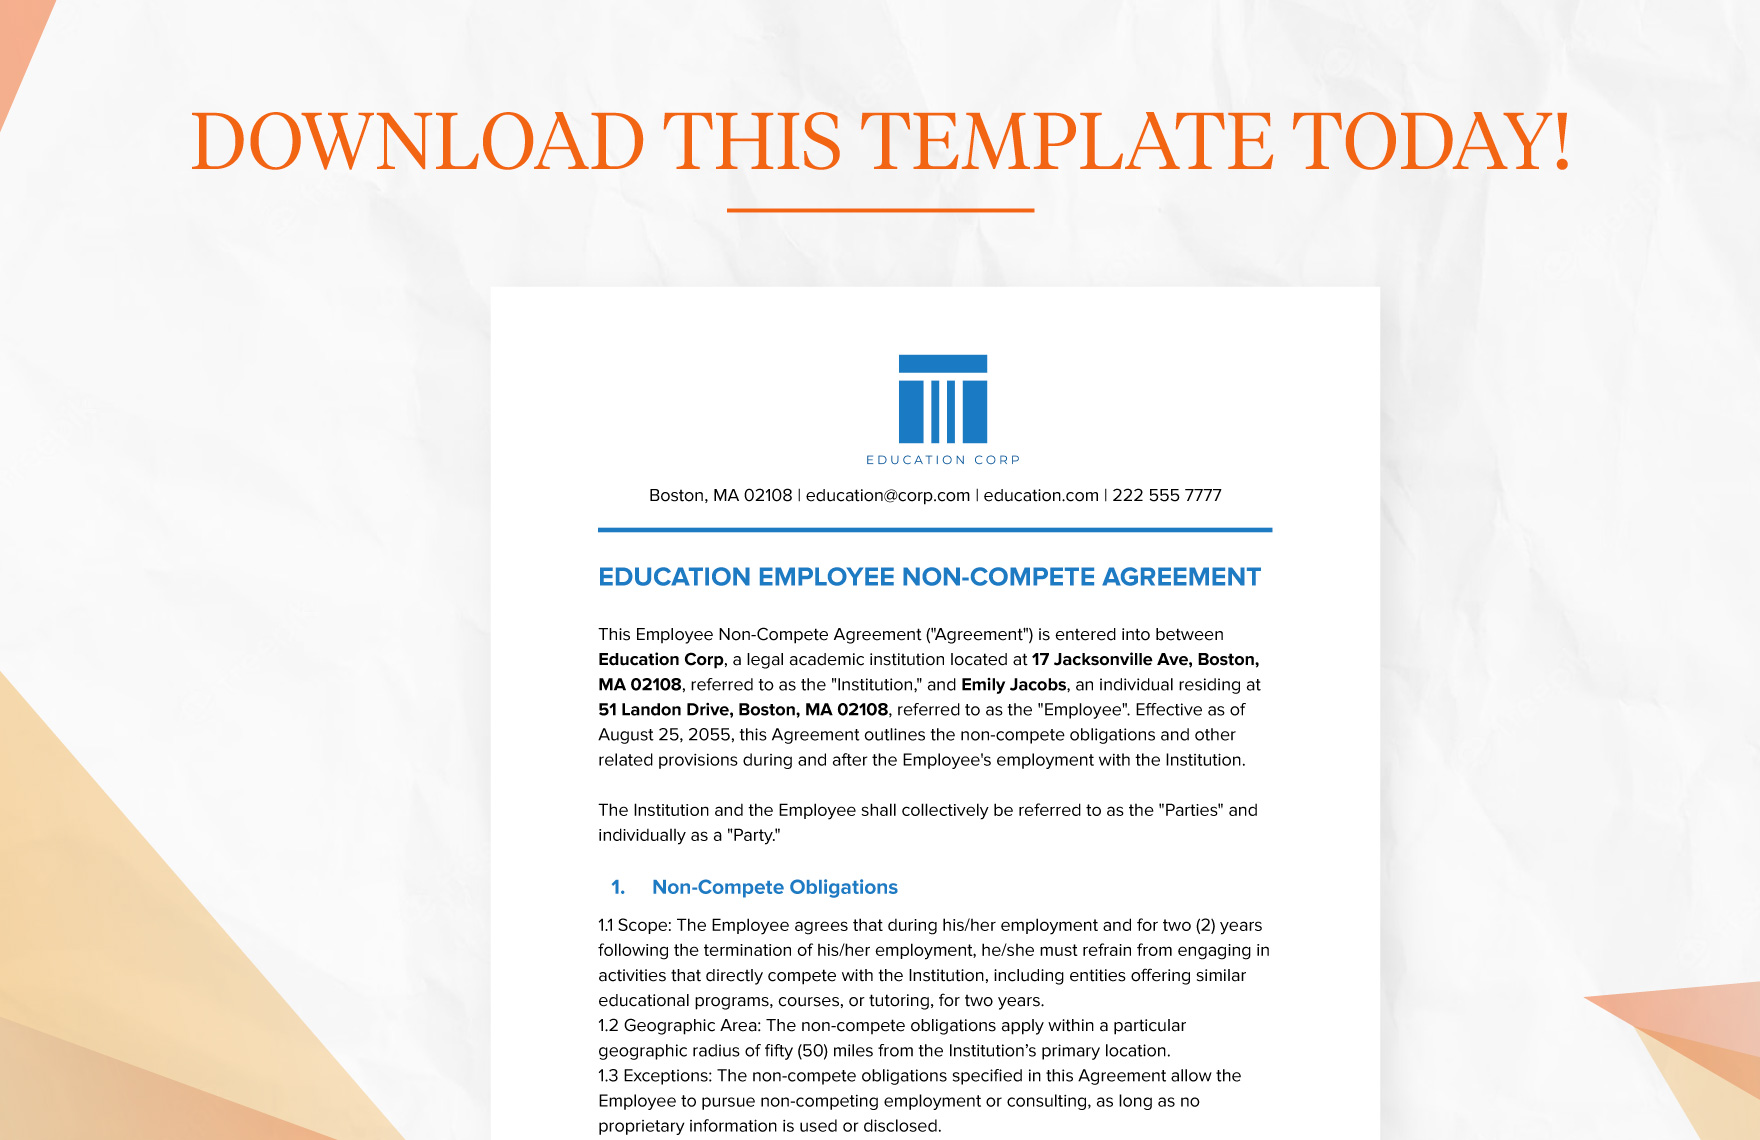 Education Employee Non-Compete Agreement Template